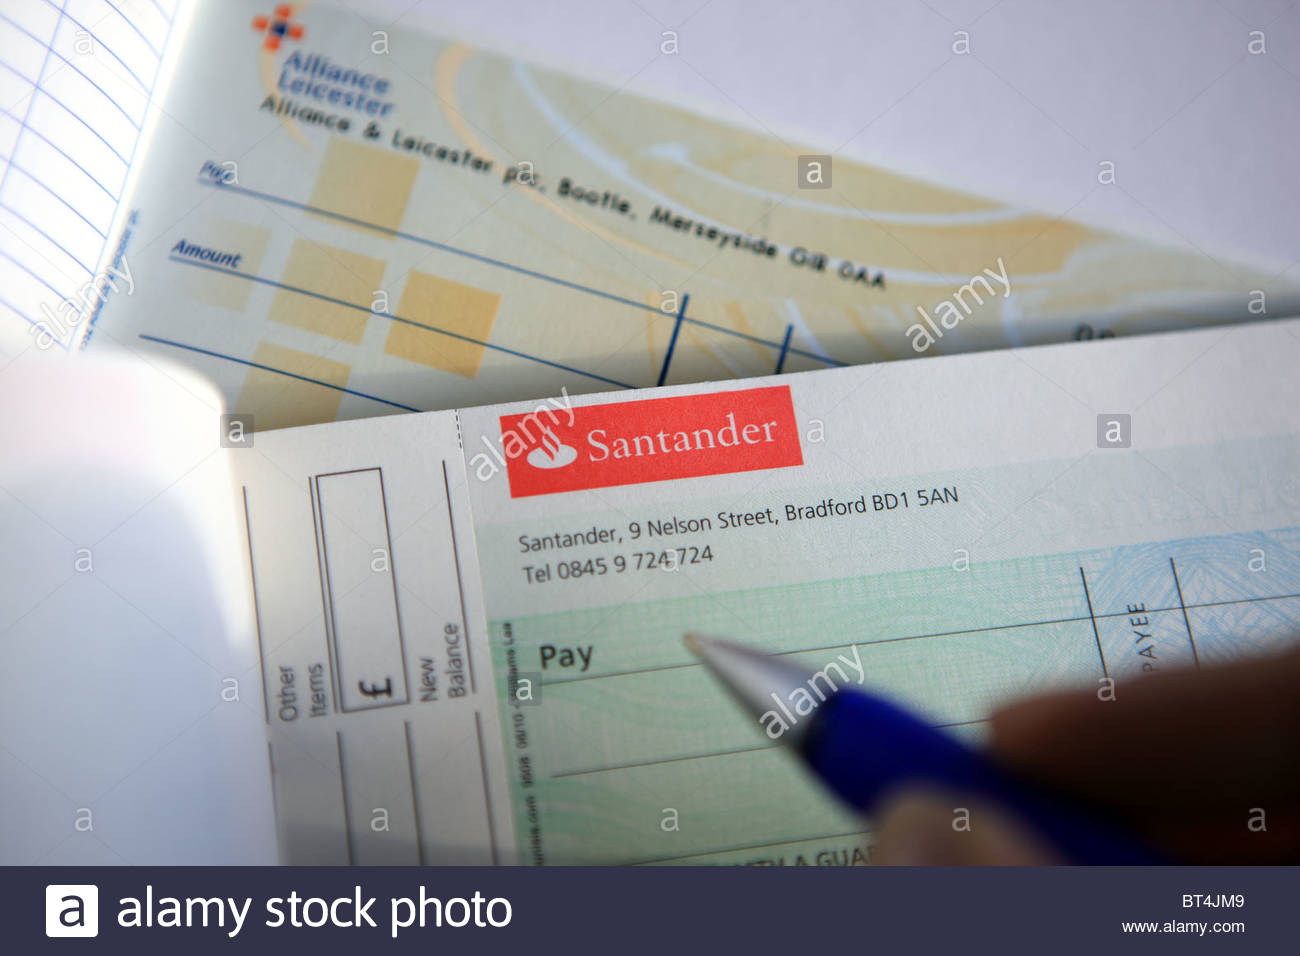 Santander Pay In Cheque App Uk